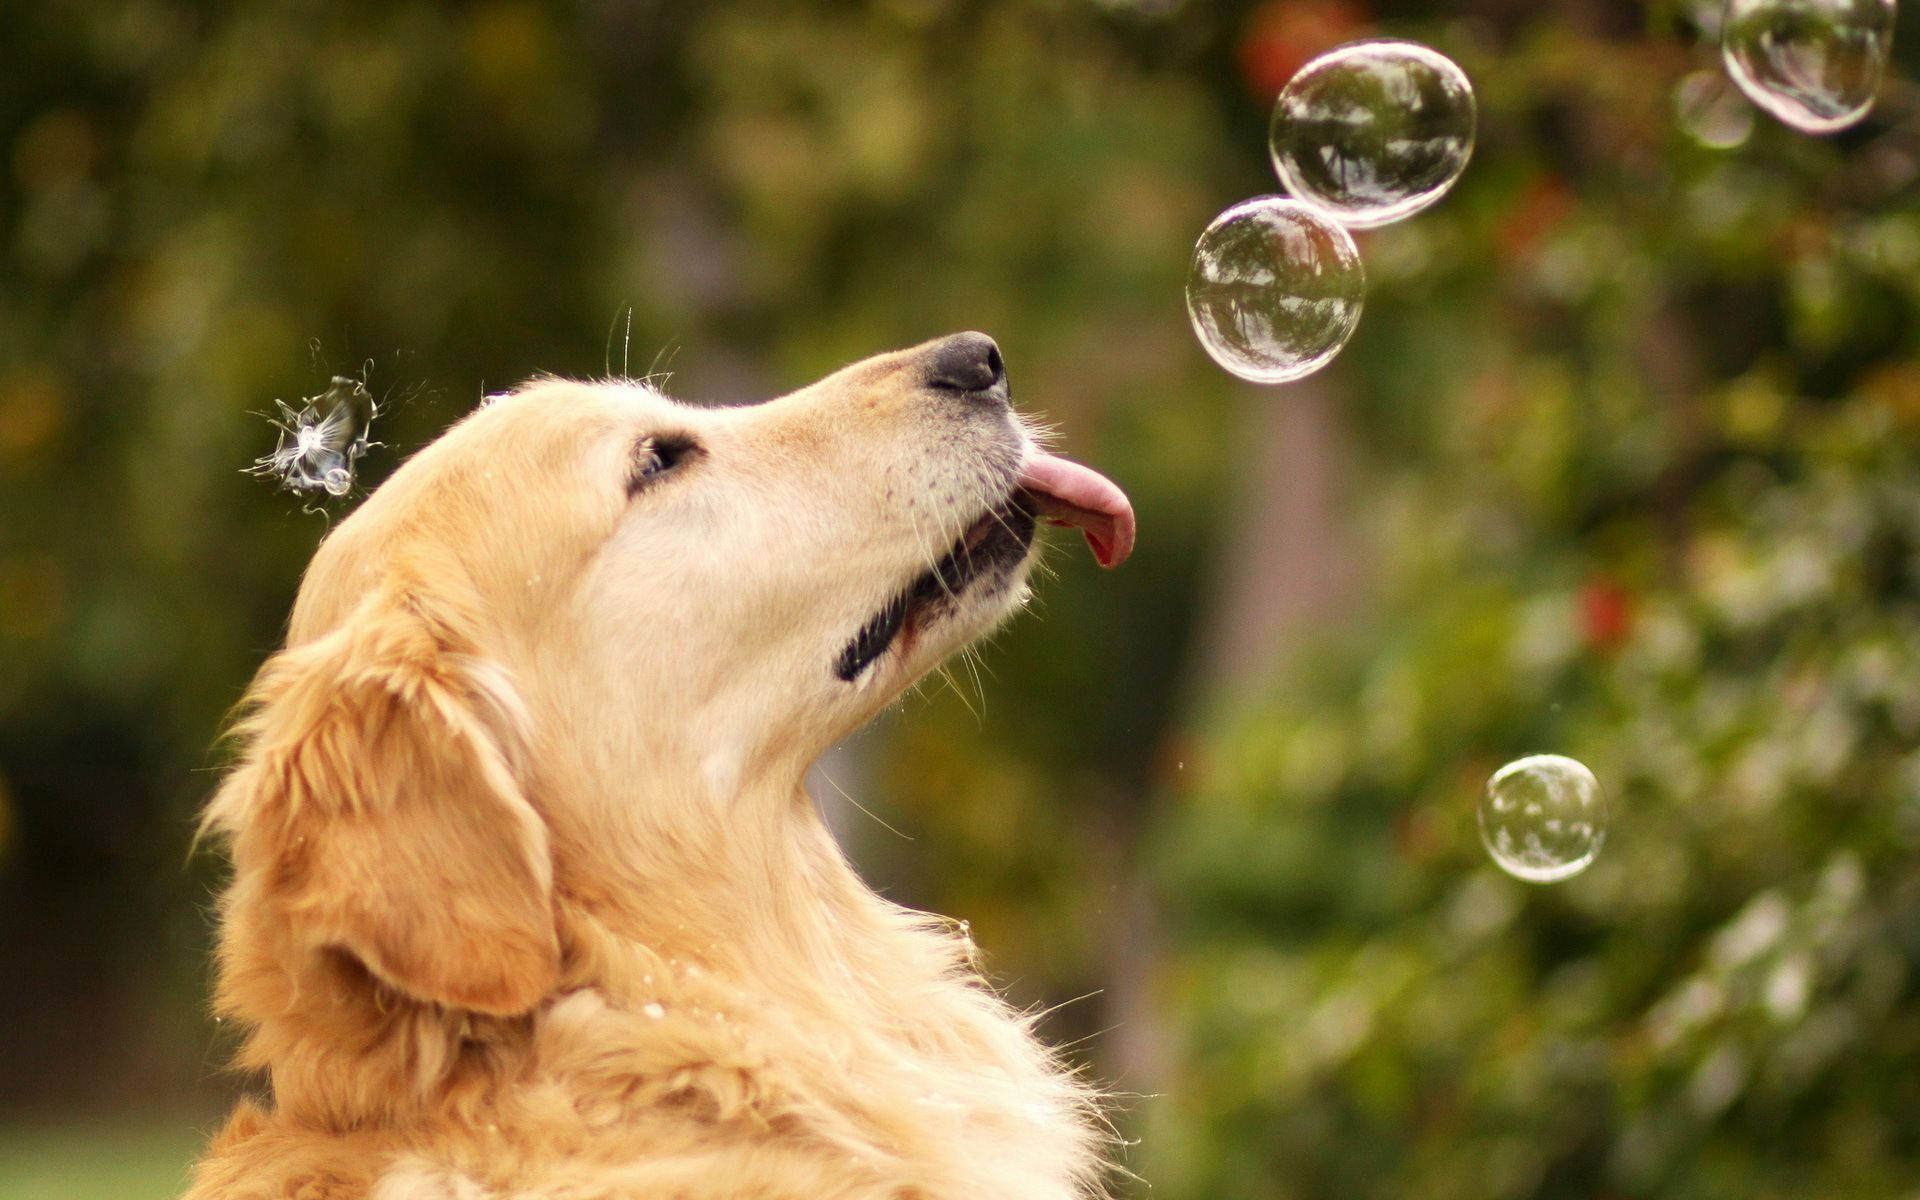 Cute Dog Popping Bubbles